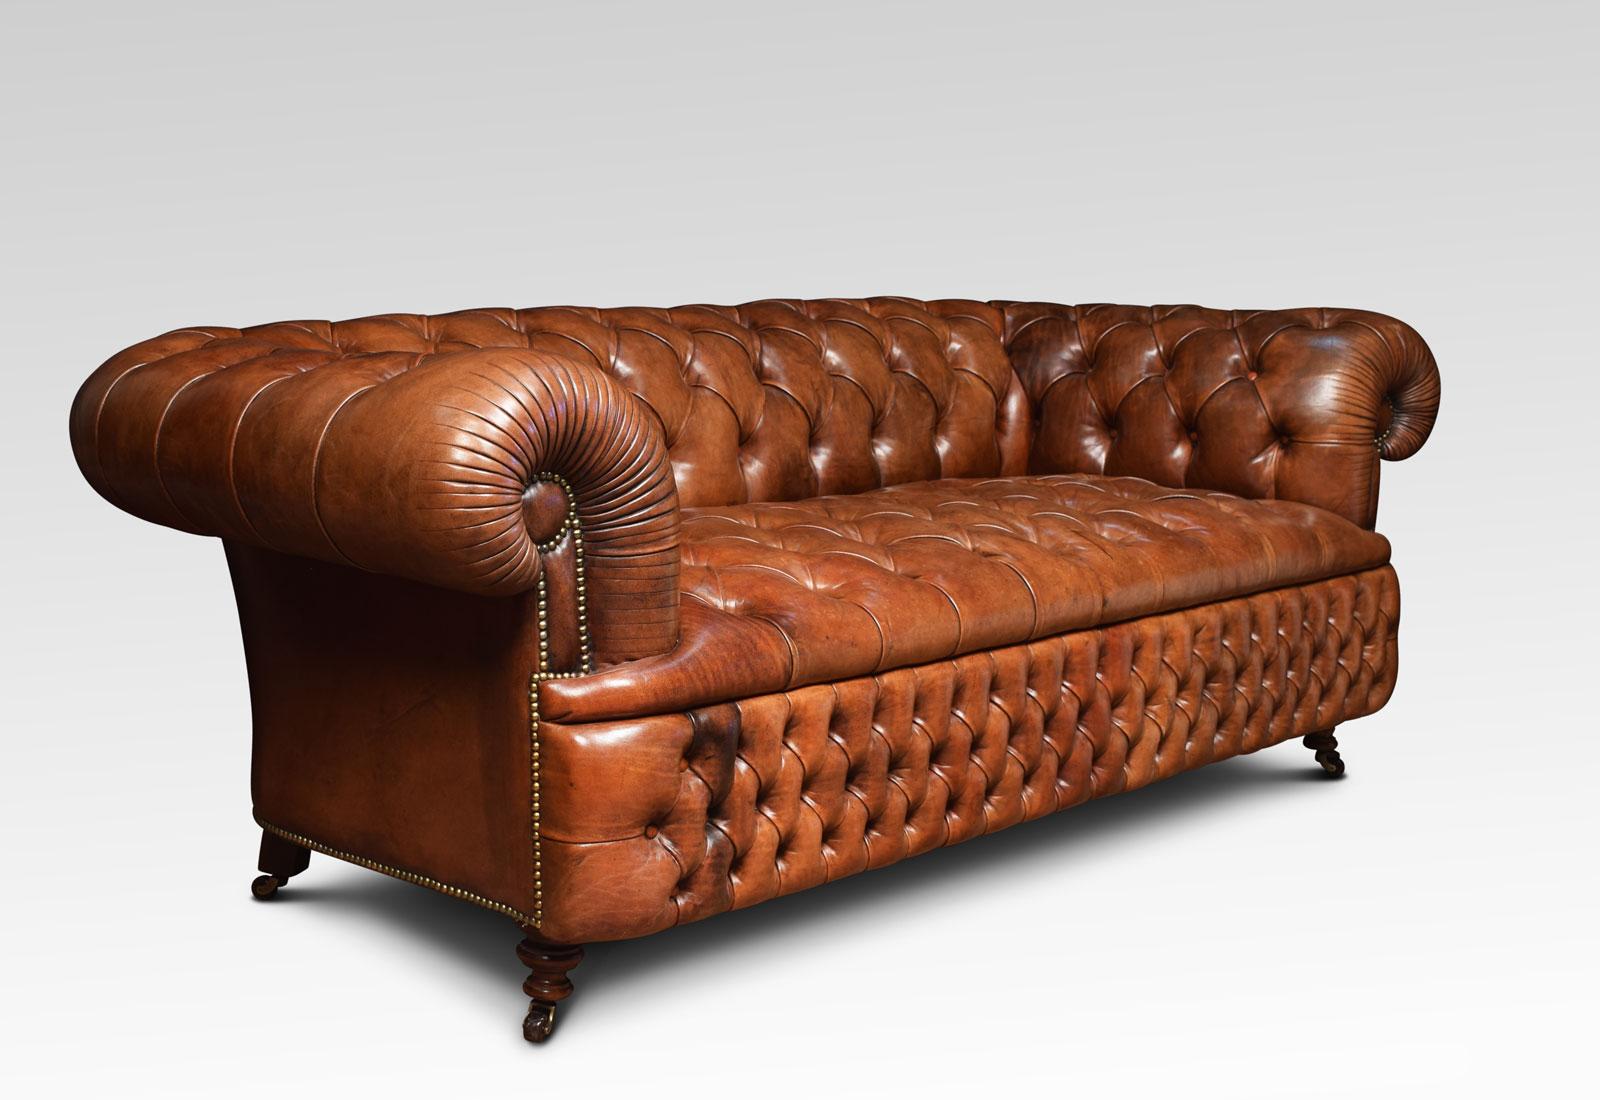 Large three-seat brown leather chesterfield sofa, having deep buttoned back and seat, raised up on turned feet with brass ceramic castors. Good solid condition, the leather is soft, nicely worn in.
Dimensions:
Height 30 inches height to seat 20